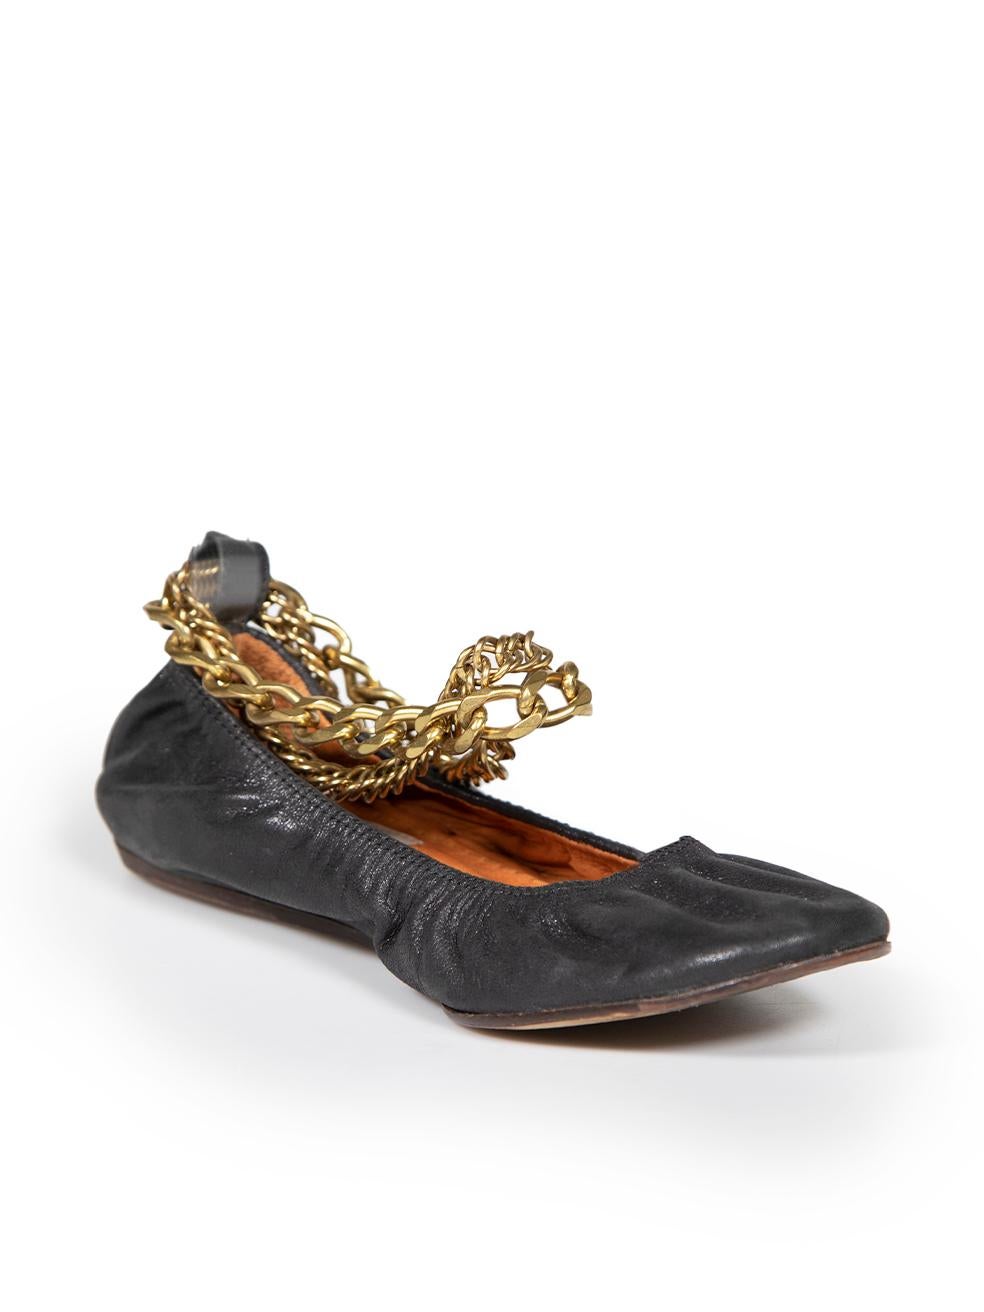 CONDITION is Good. General wear to shoes is evident. Moderate signs of wear to both shoes with cracking of the soles on this used Lanvin designer resale item.
 
 
 
 Details
 
 
 Black
 
 Leather
 
 Ballet flats
 
 Round toe
 
 Flat heel
 
 Gold